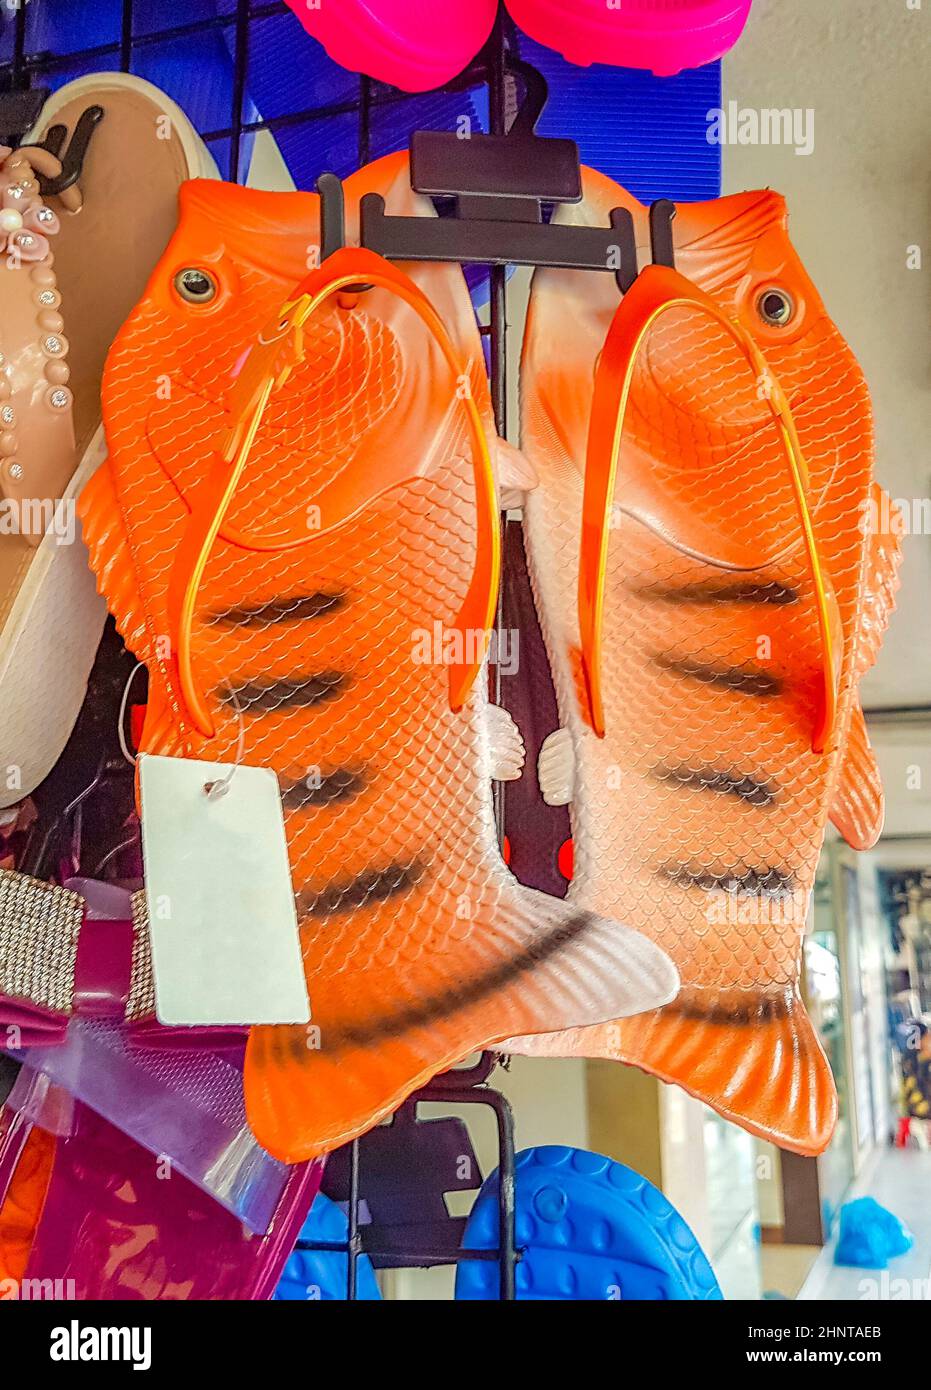 Colorful fish shoes for sale in Bangkok Thailand. Stock Photo